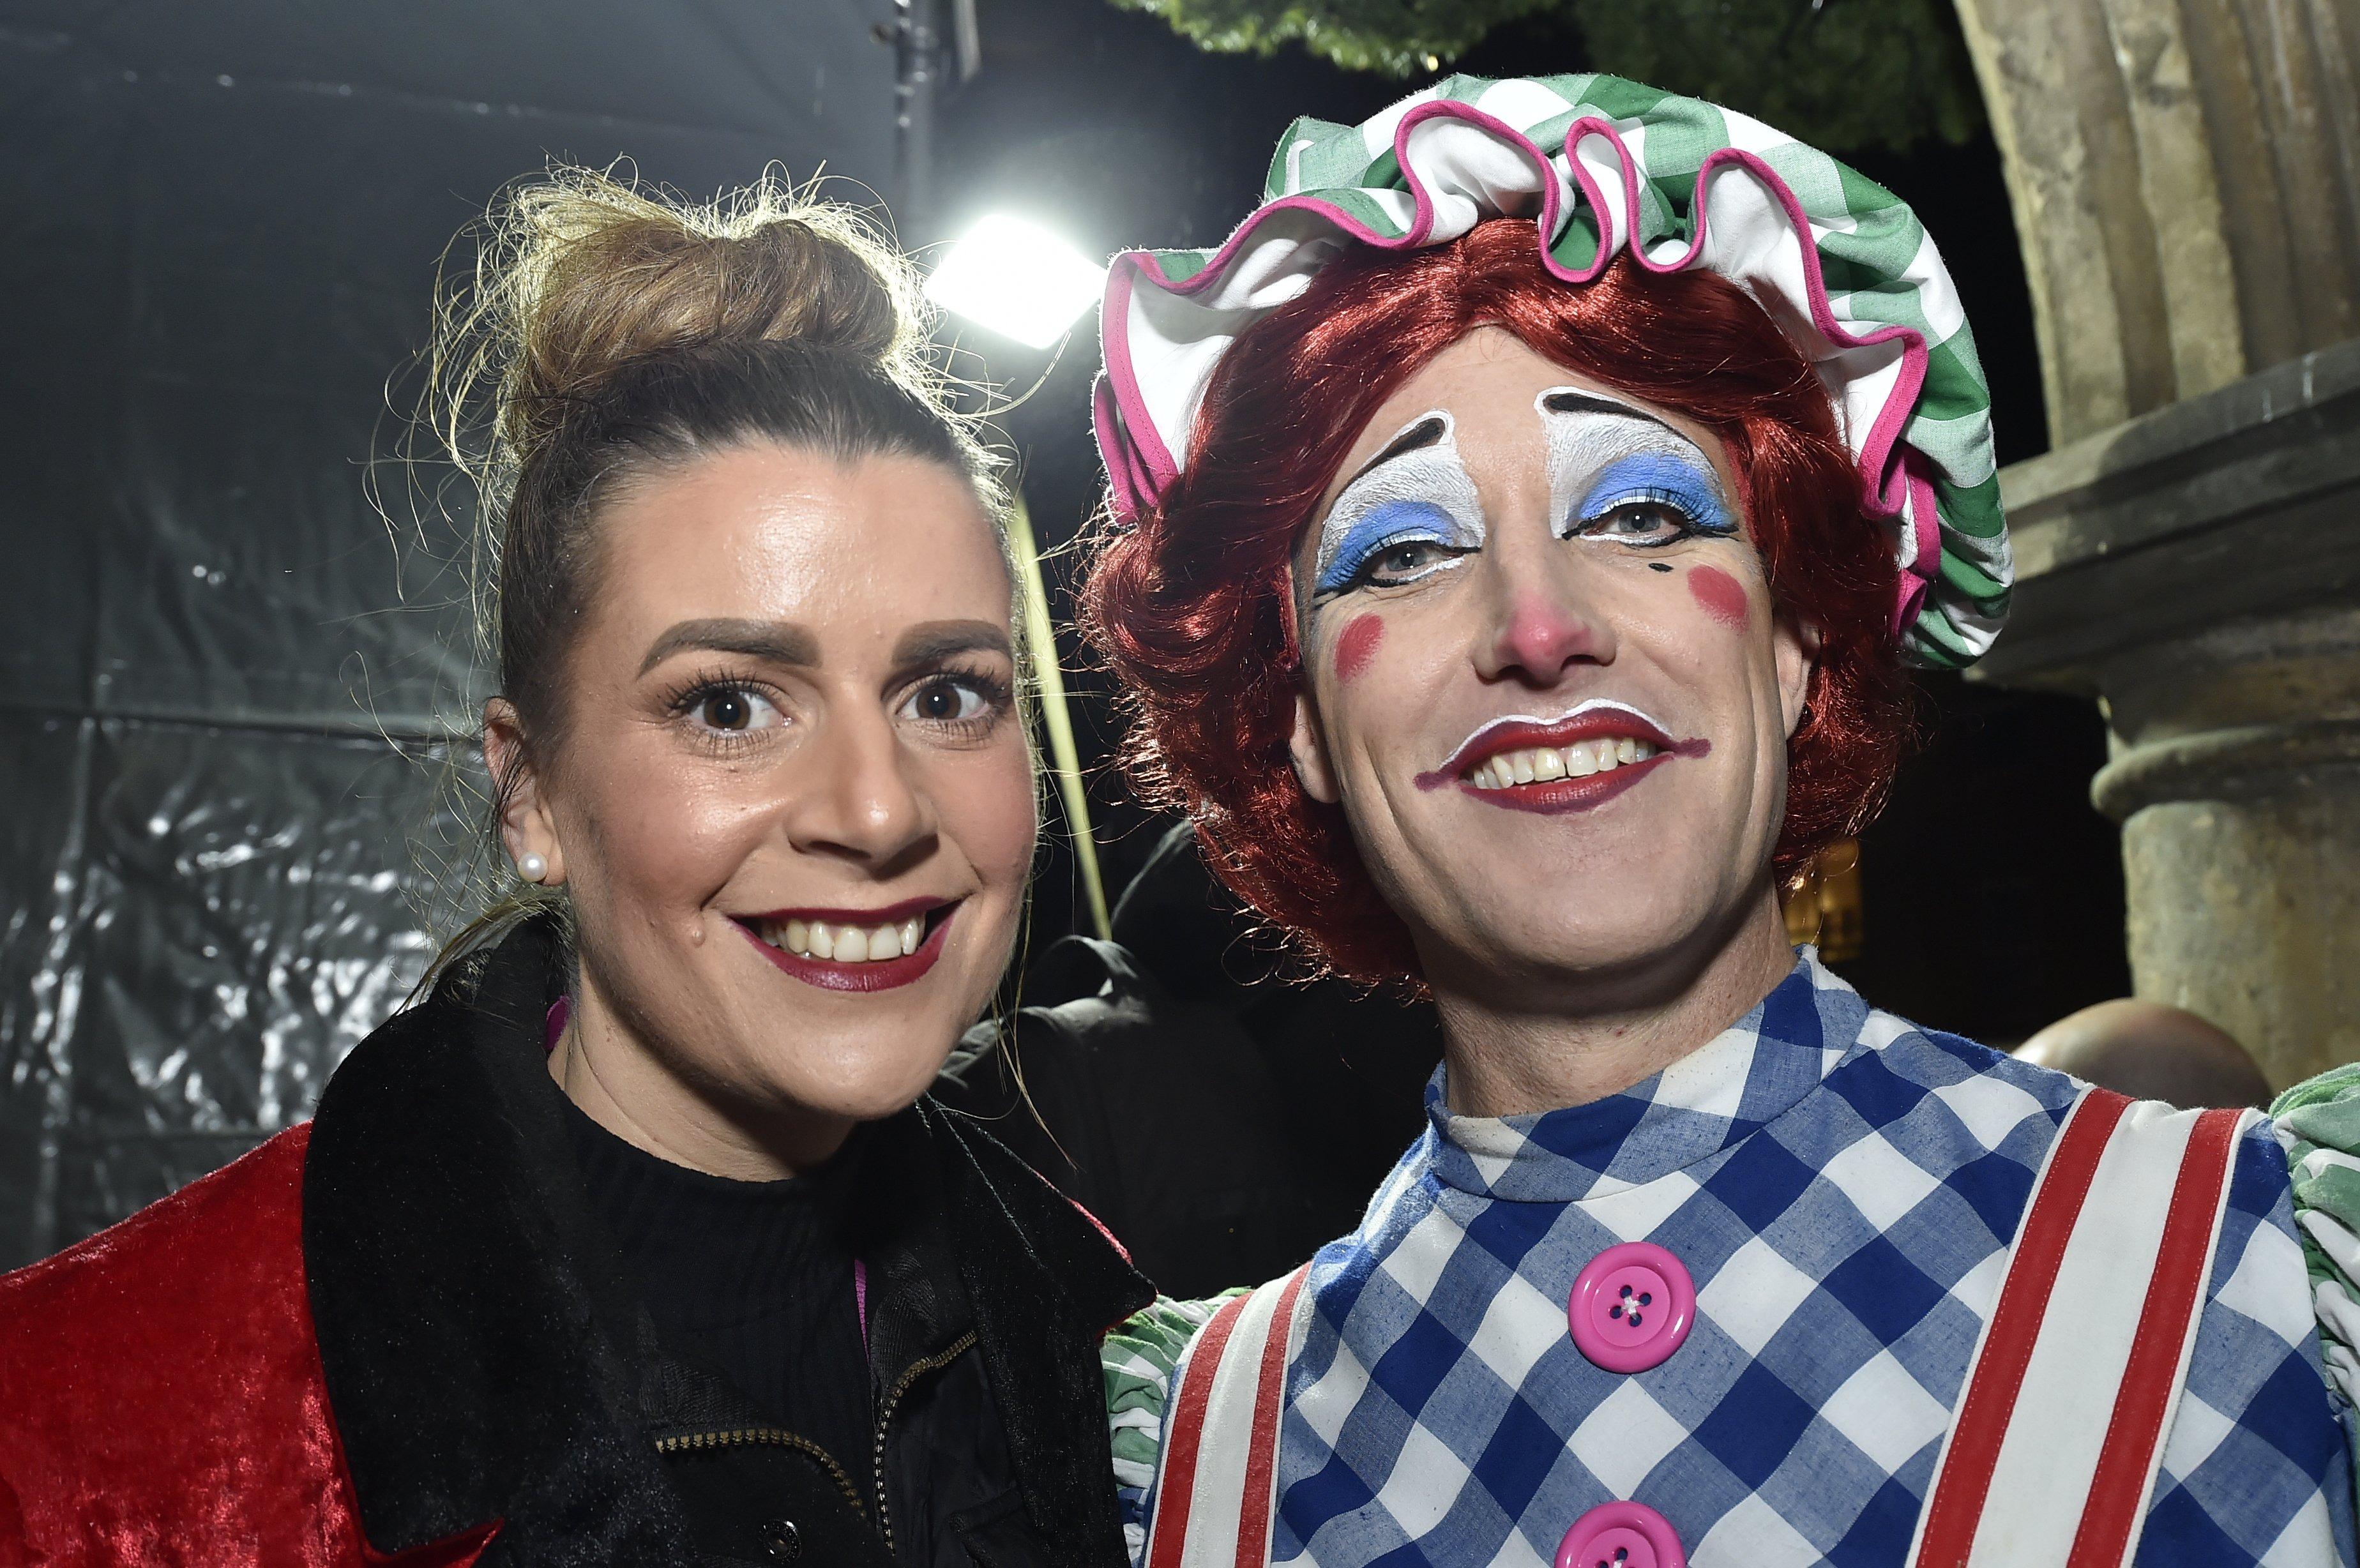 The lights turned on in Cathedral Square. Beauty and the Beast stars from the Key Theatre panto